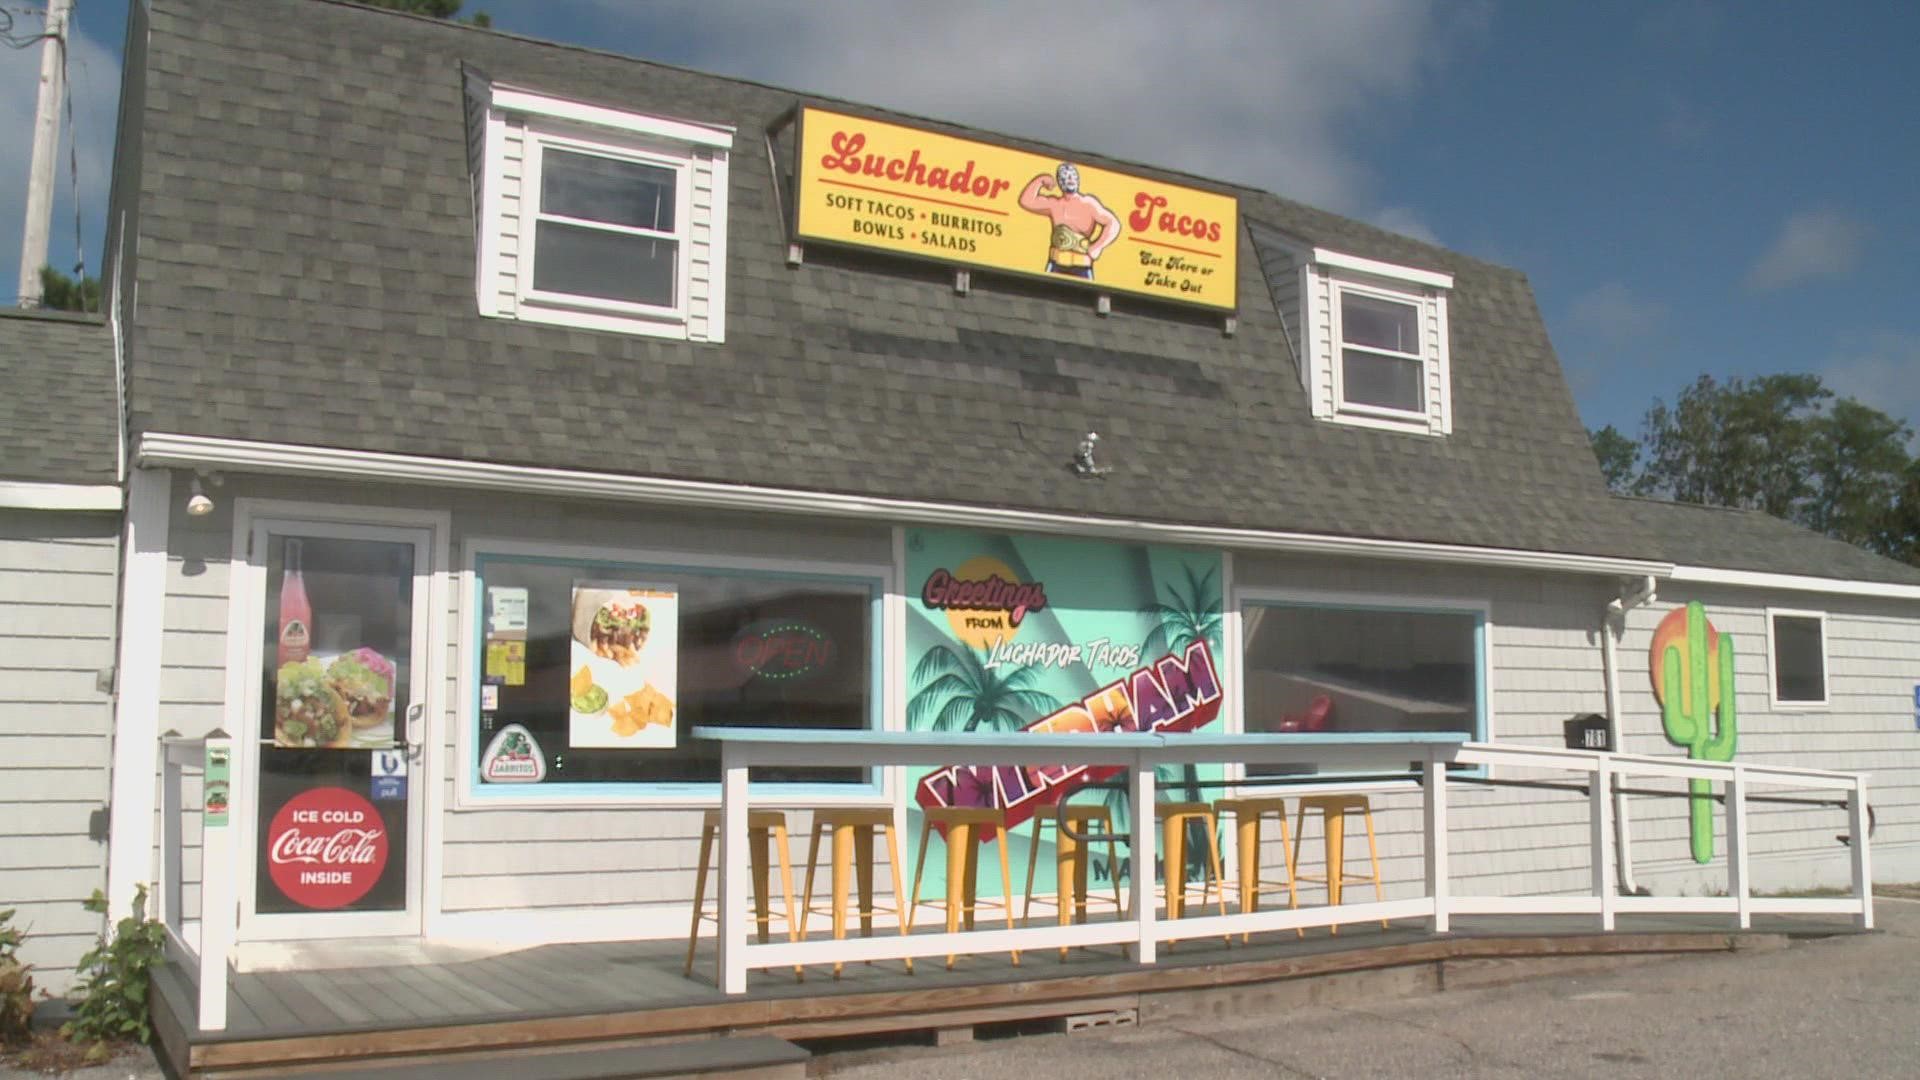 Luchador Tacos has locations in South Paris, Windham, and North Conway, NH. Their staple is street tacos, but Mainers can find all sorts of Mexican dishes.